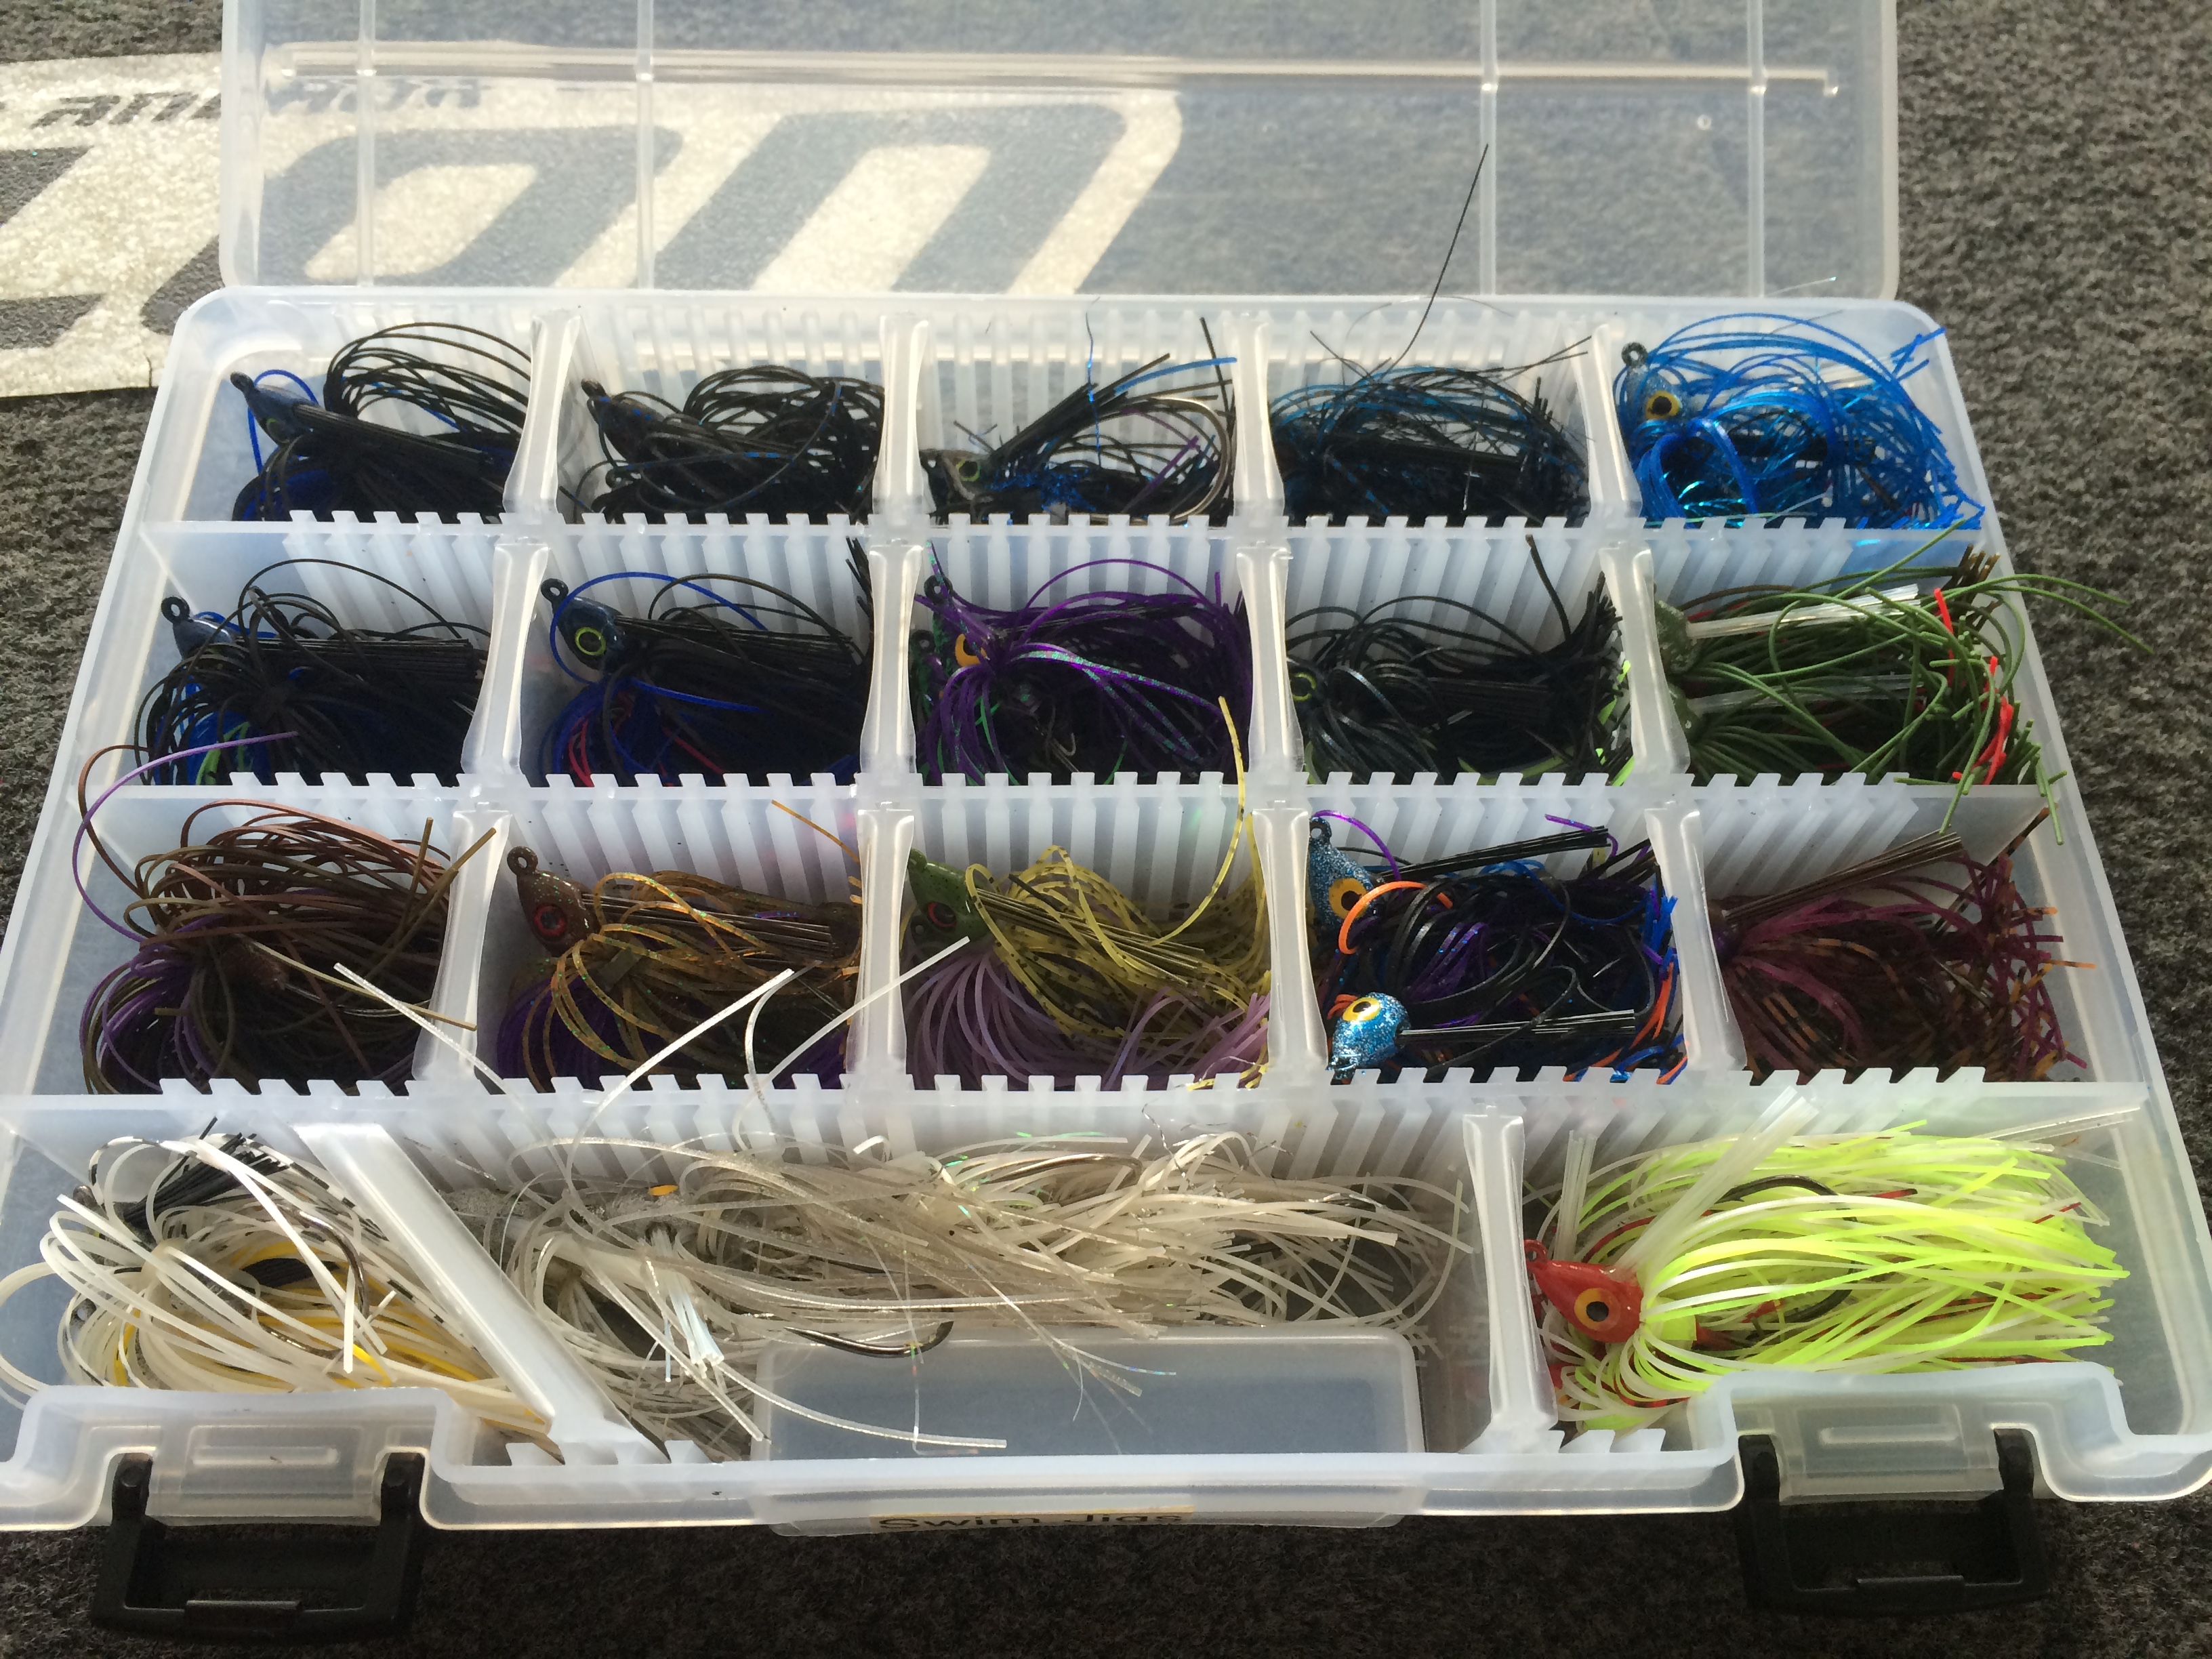 Organizing Small Spaces for Fishing Tackle - Just The Tip - Ep. 9 